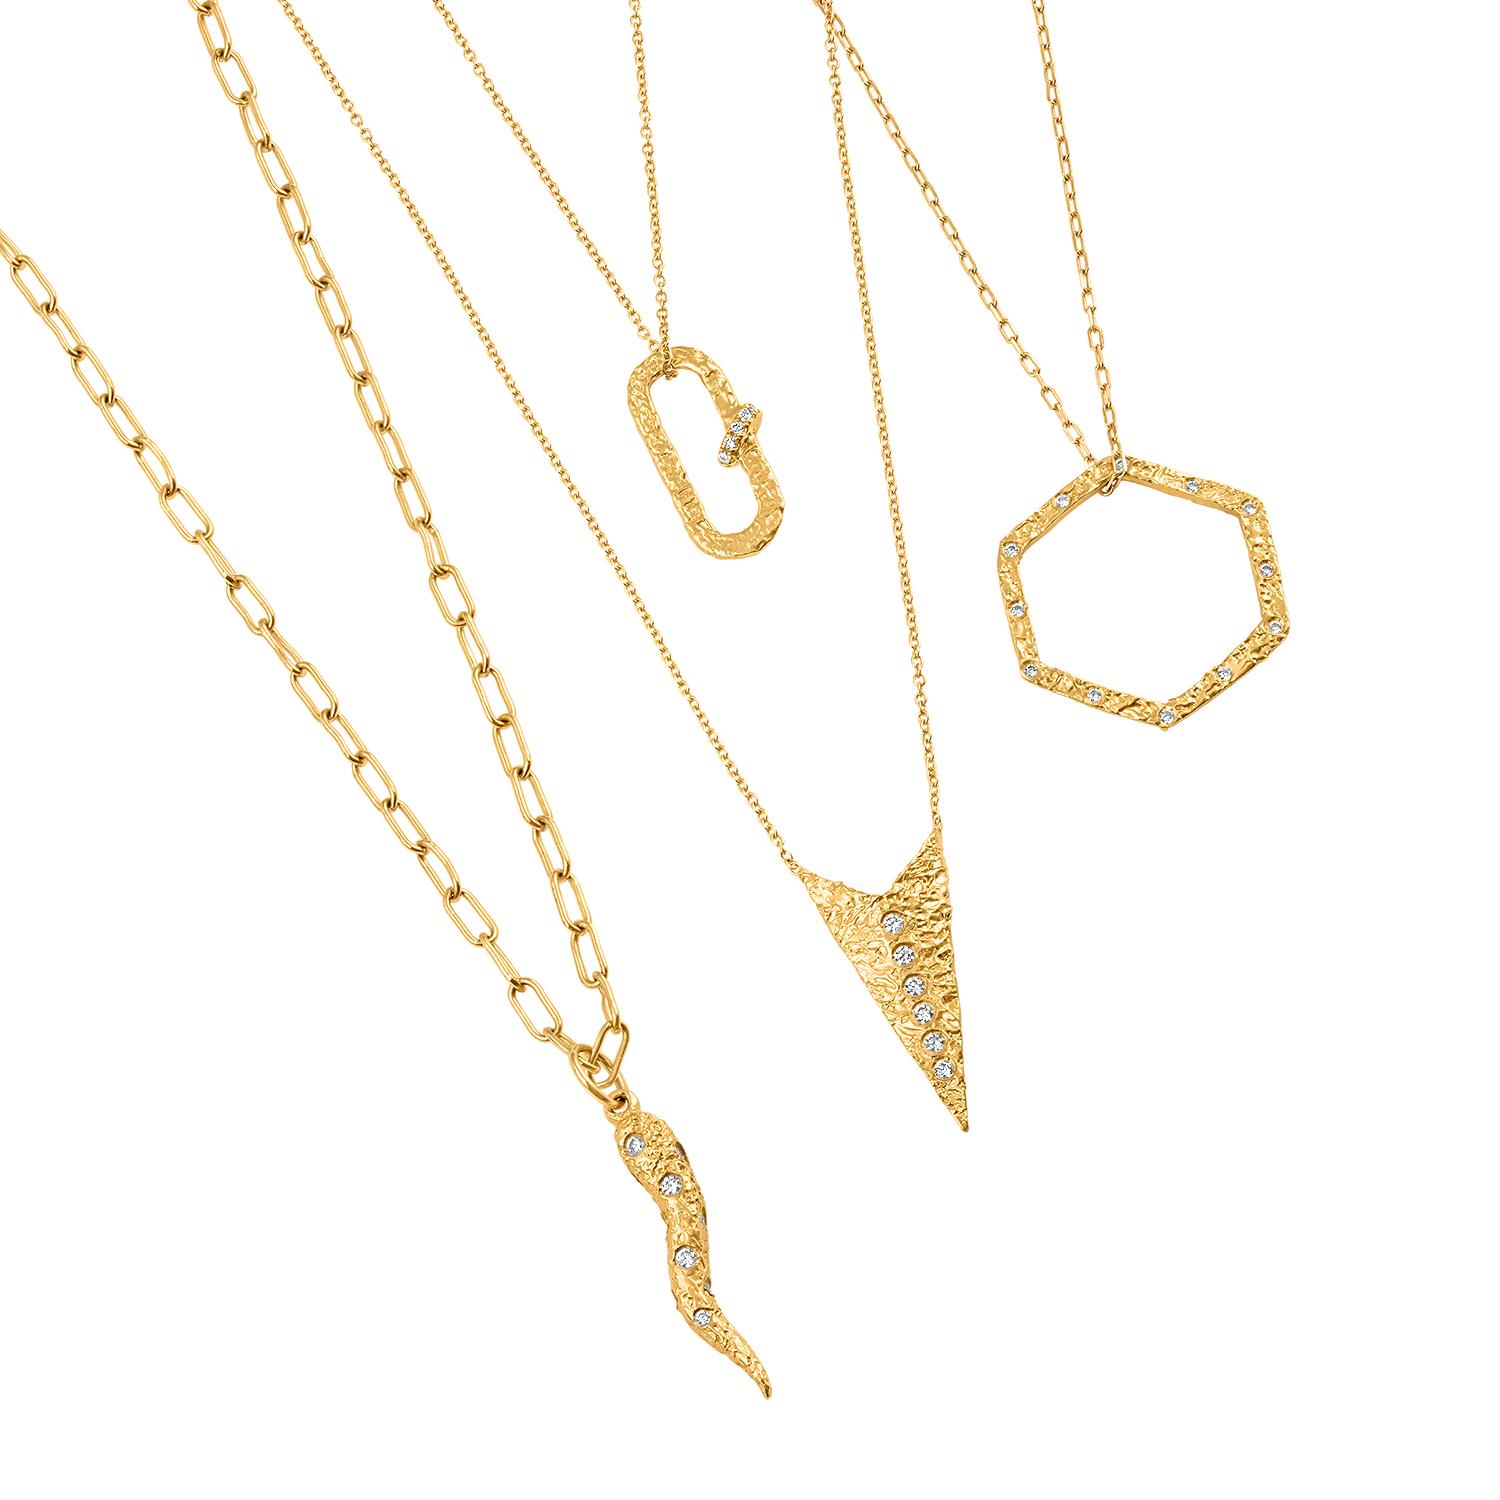 Round Cut The Hexagon Diamond Necklace in 22k Gold For Sale